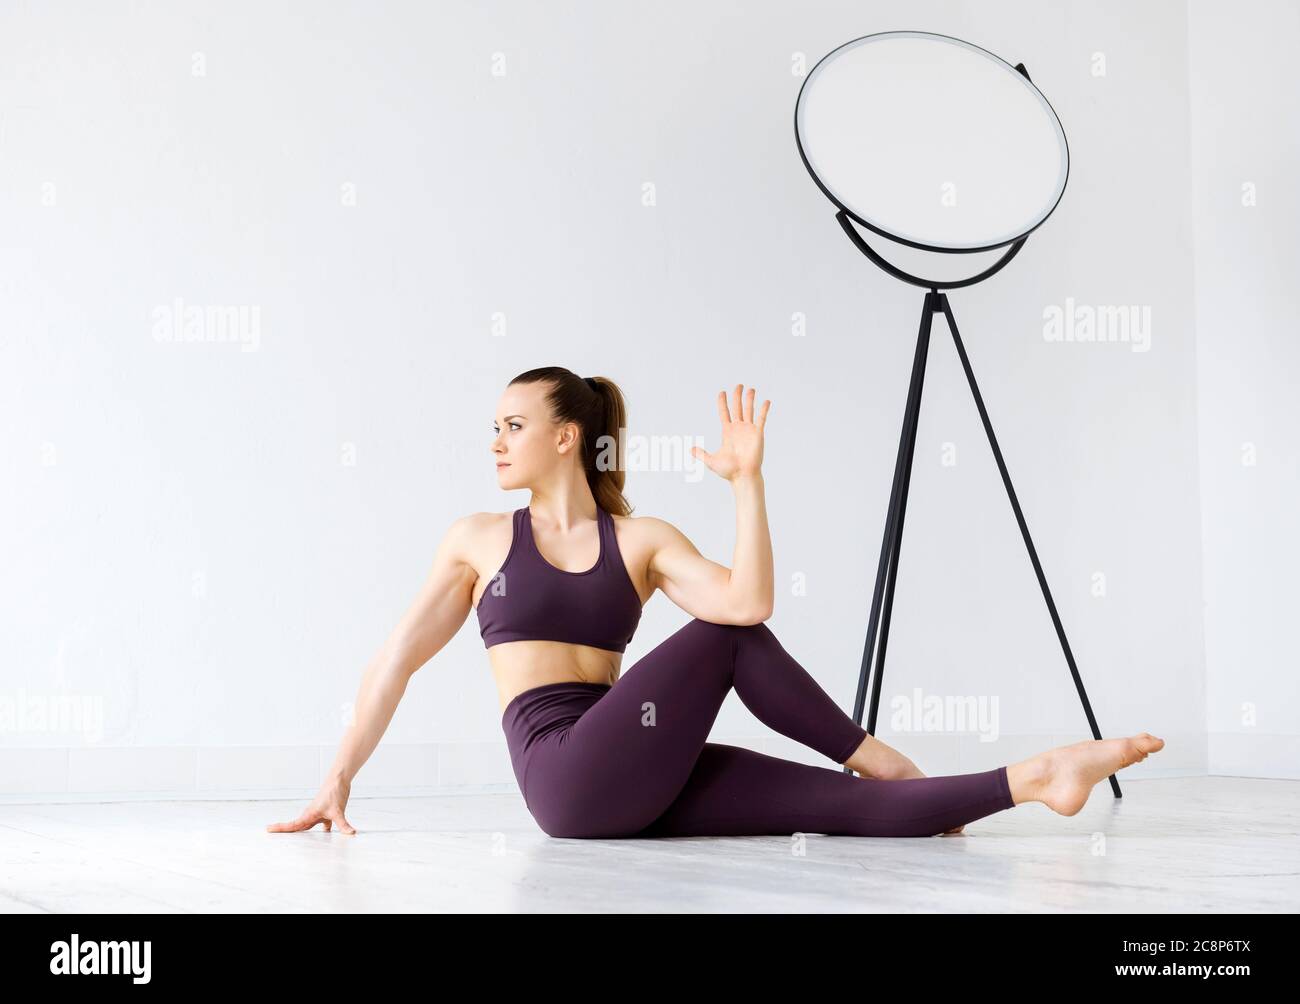 Athletic young woman doing twist stretching exercises on the floor in a  high key gym in a health and fitness concept to tone her lower back muscles  Stock Photo - Alamy